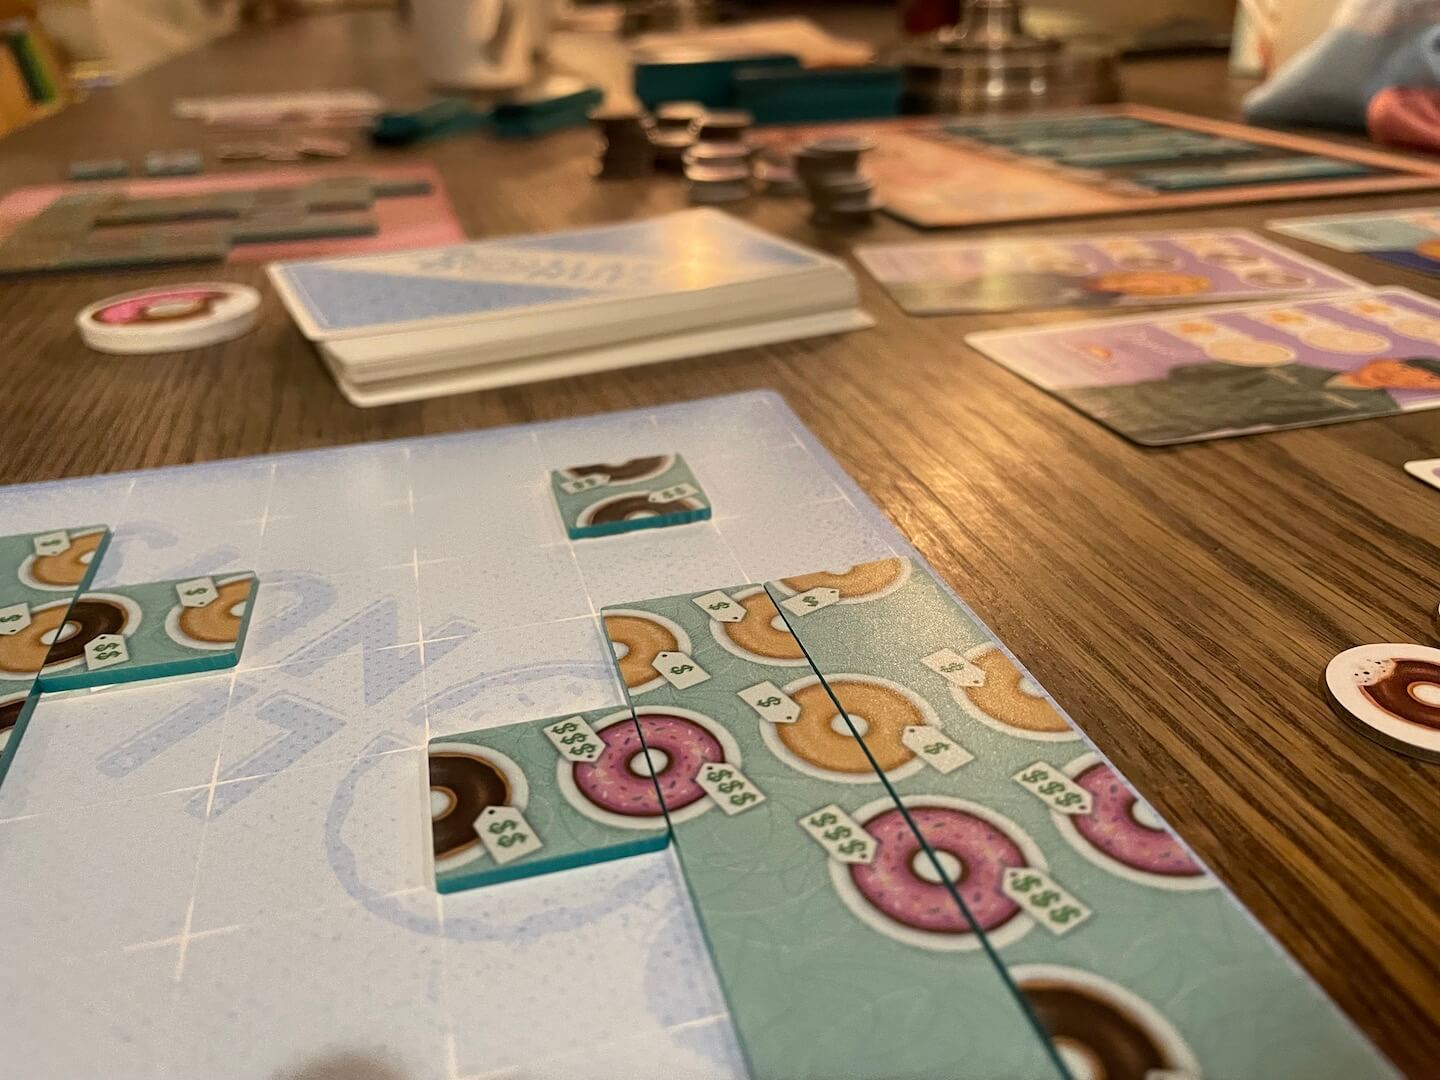 The board mid-game in Dollars To Donuts